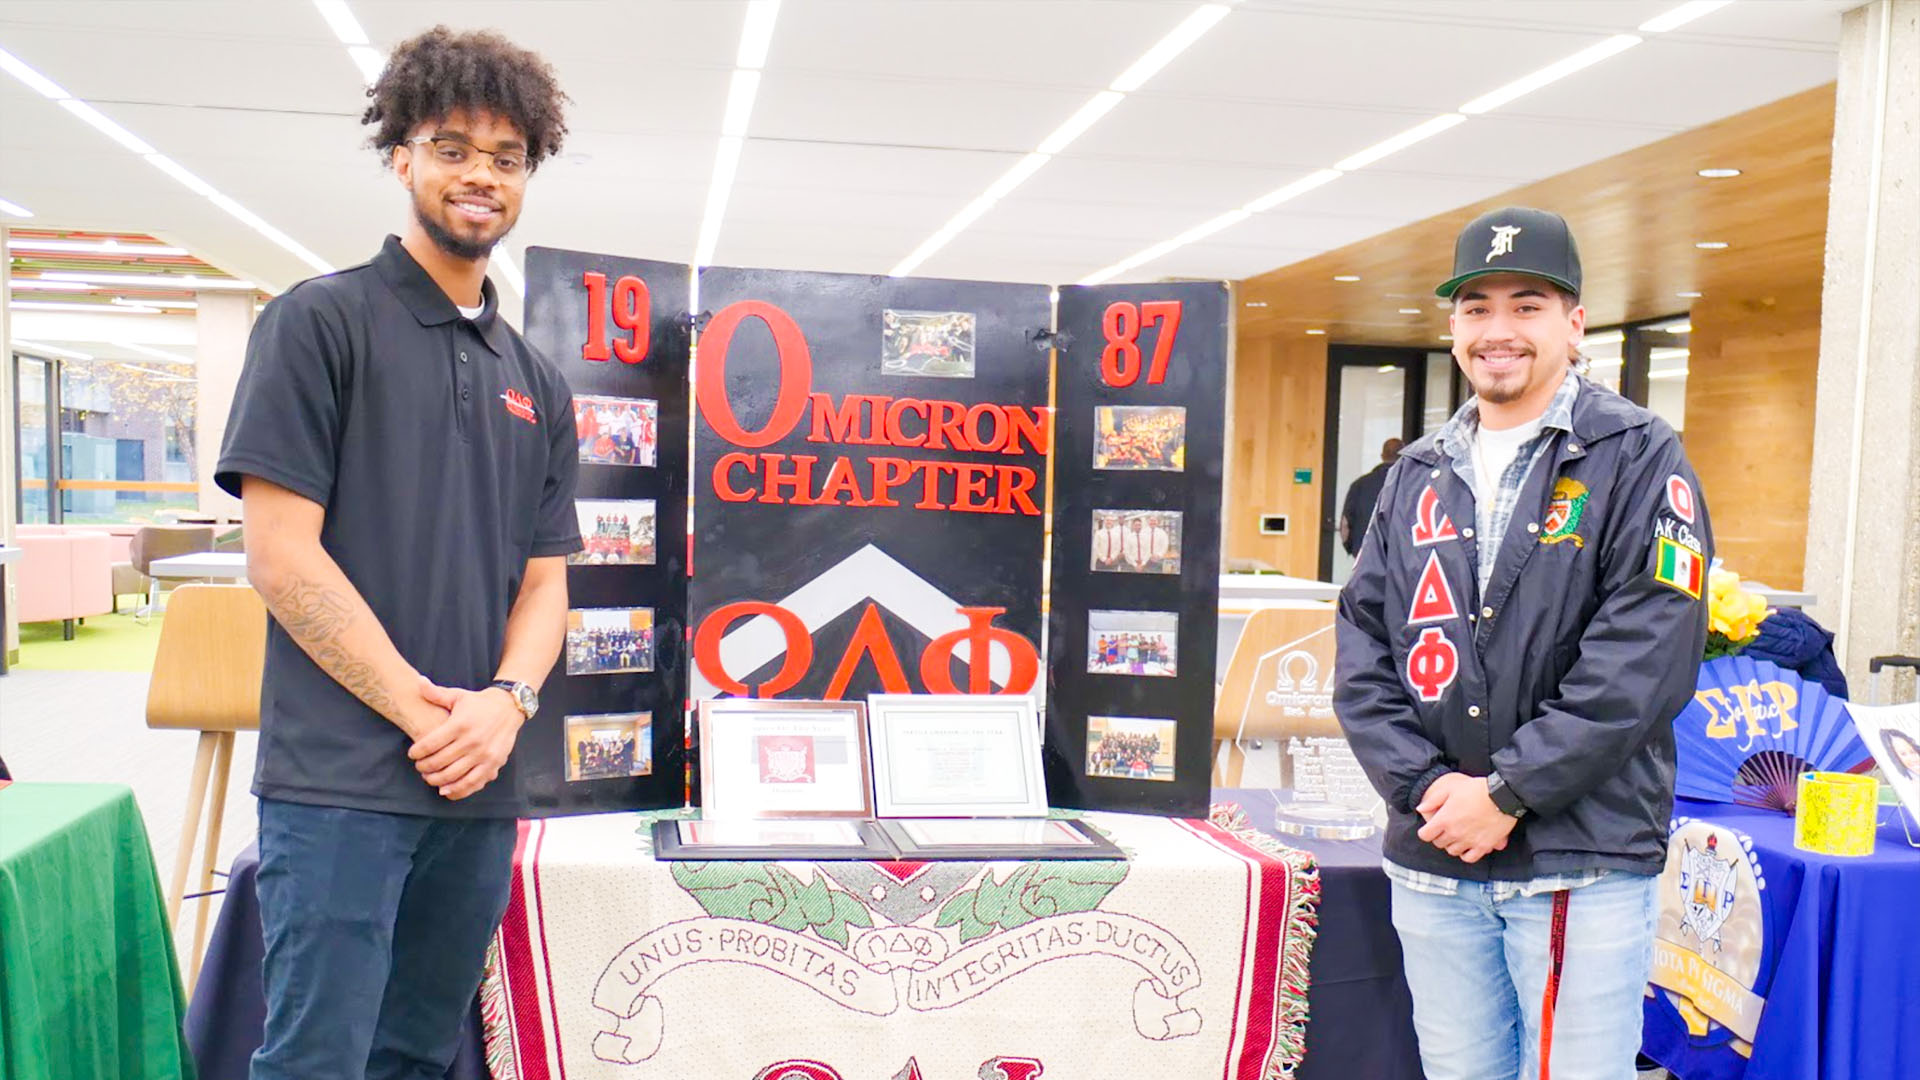 A table displaying the Omicron Chapter